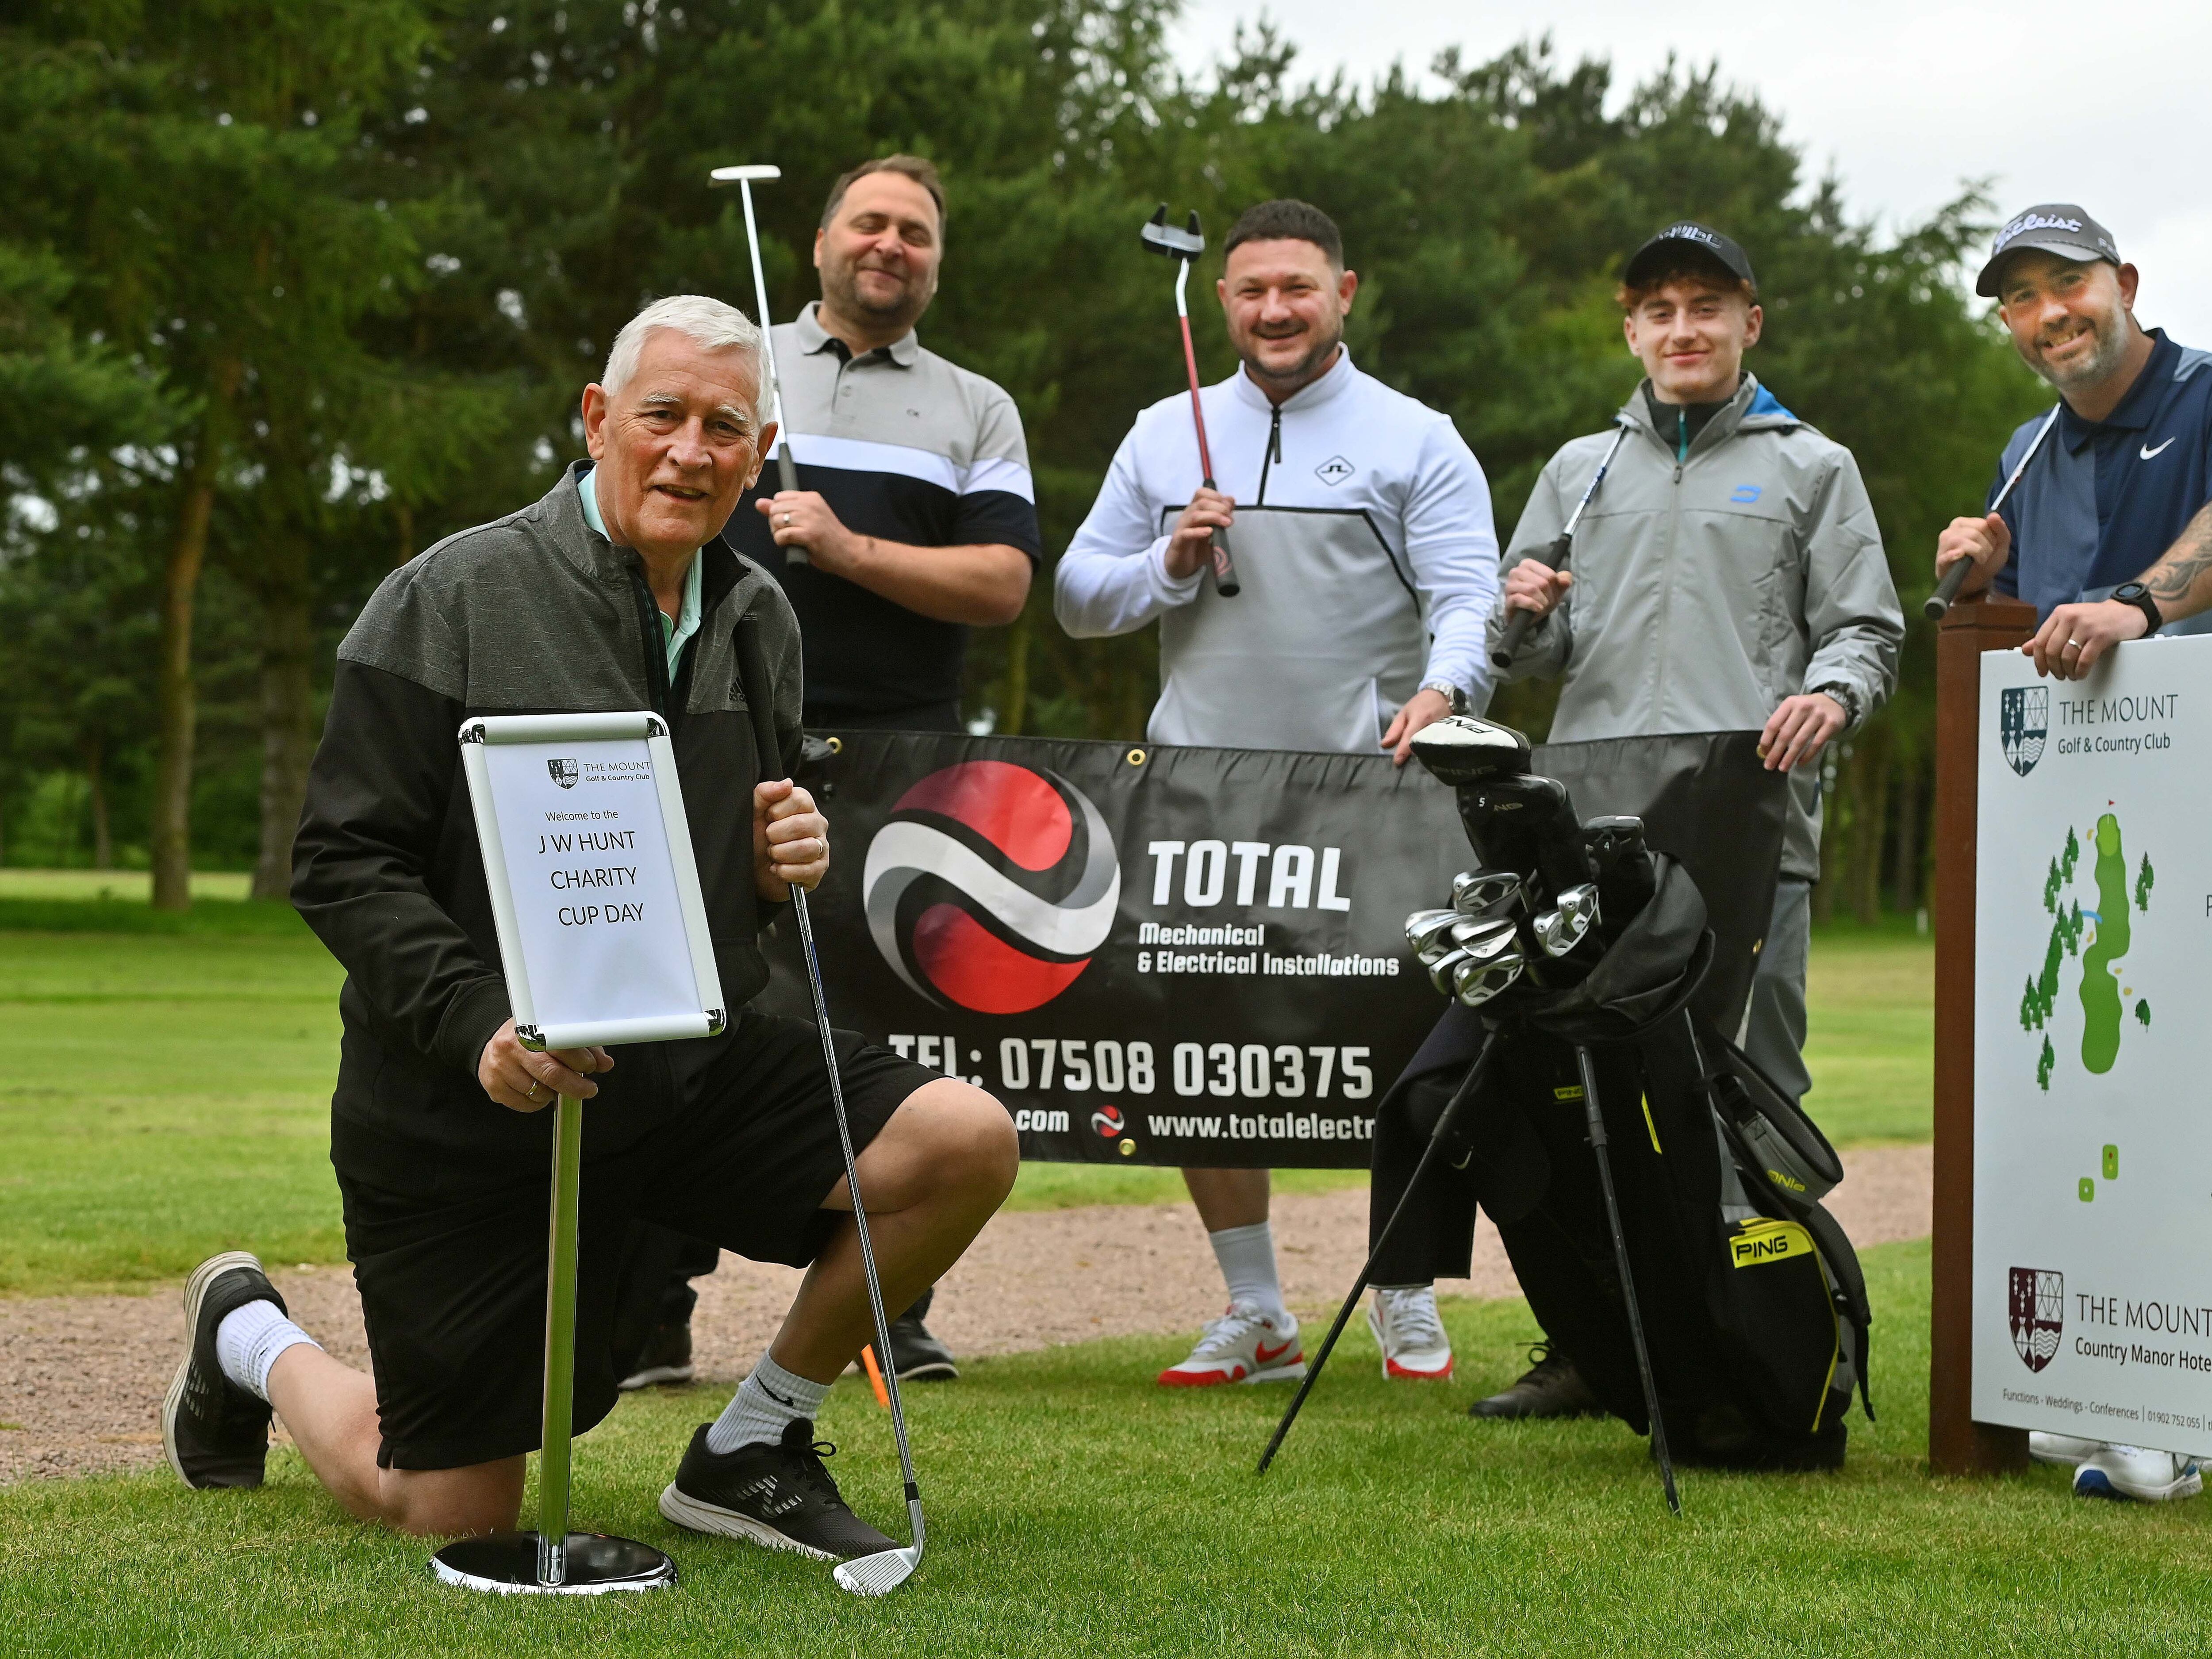 Golfers and supporters tee up  to boost charity push